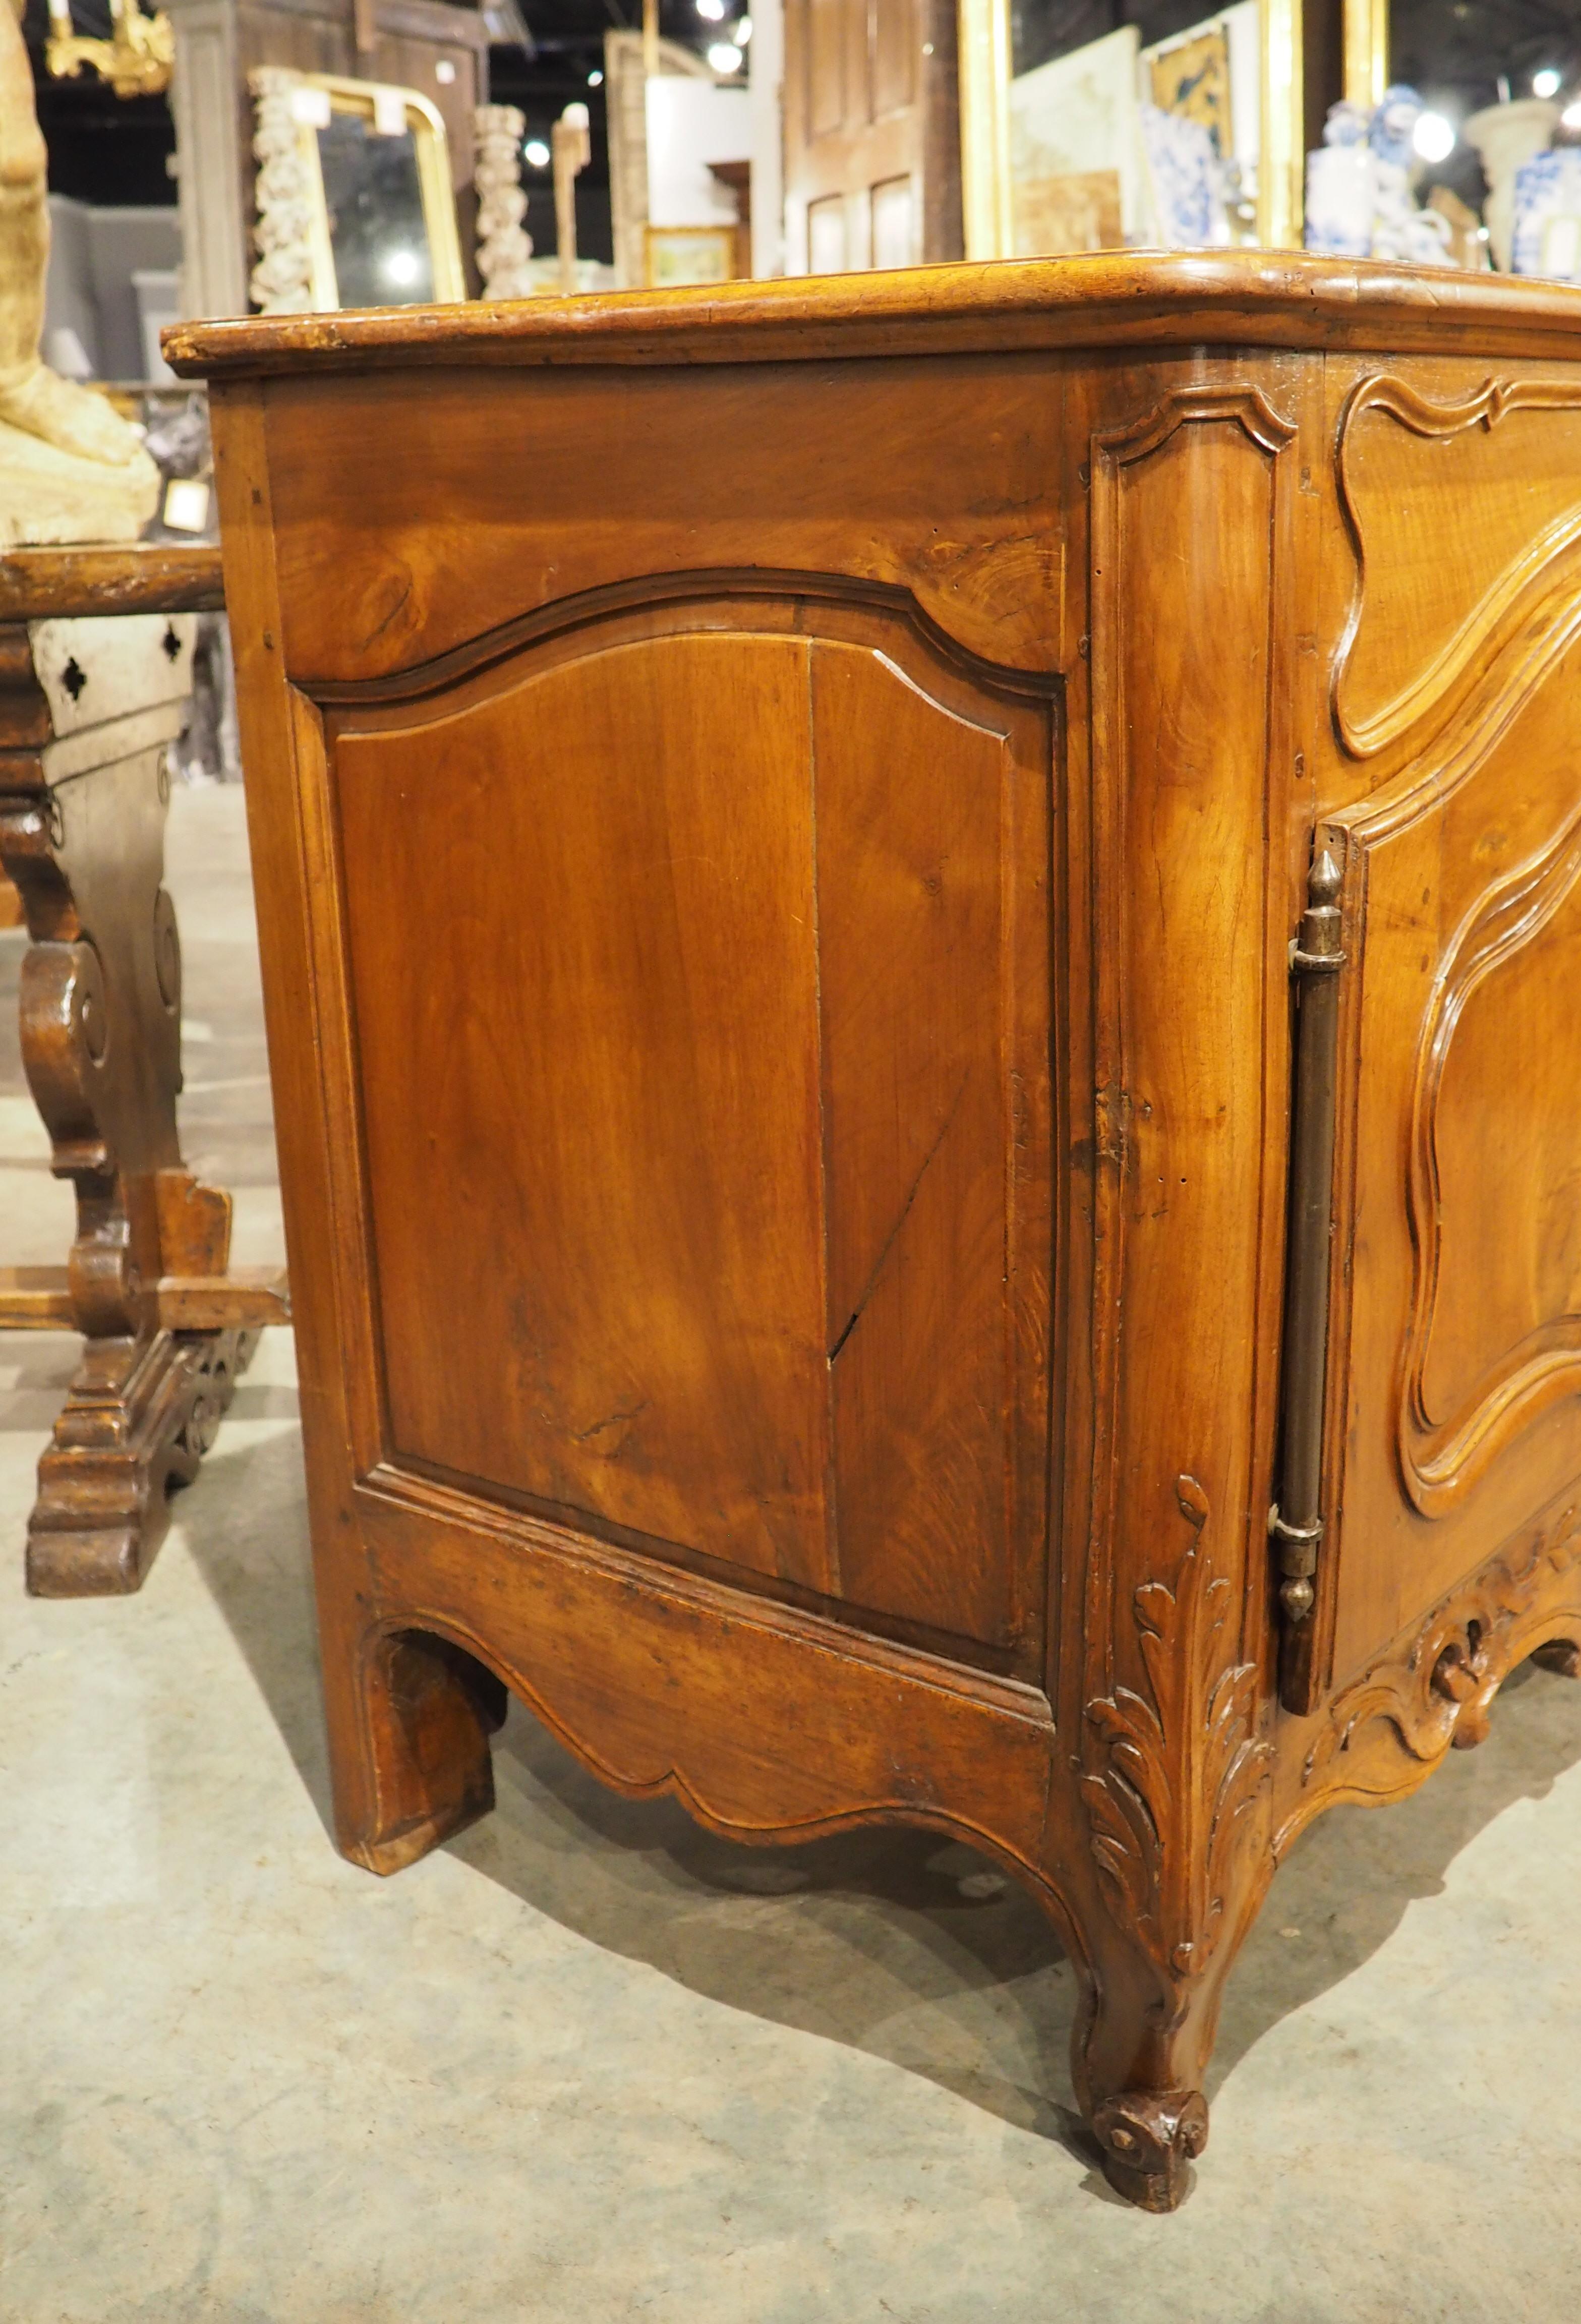 Circa 1750 Carved Walnut Wood Buffet Crédence from Nîmes, France 5